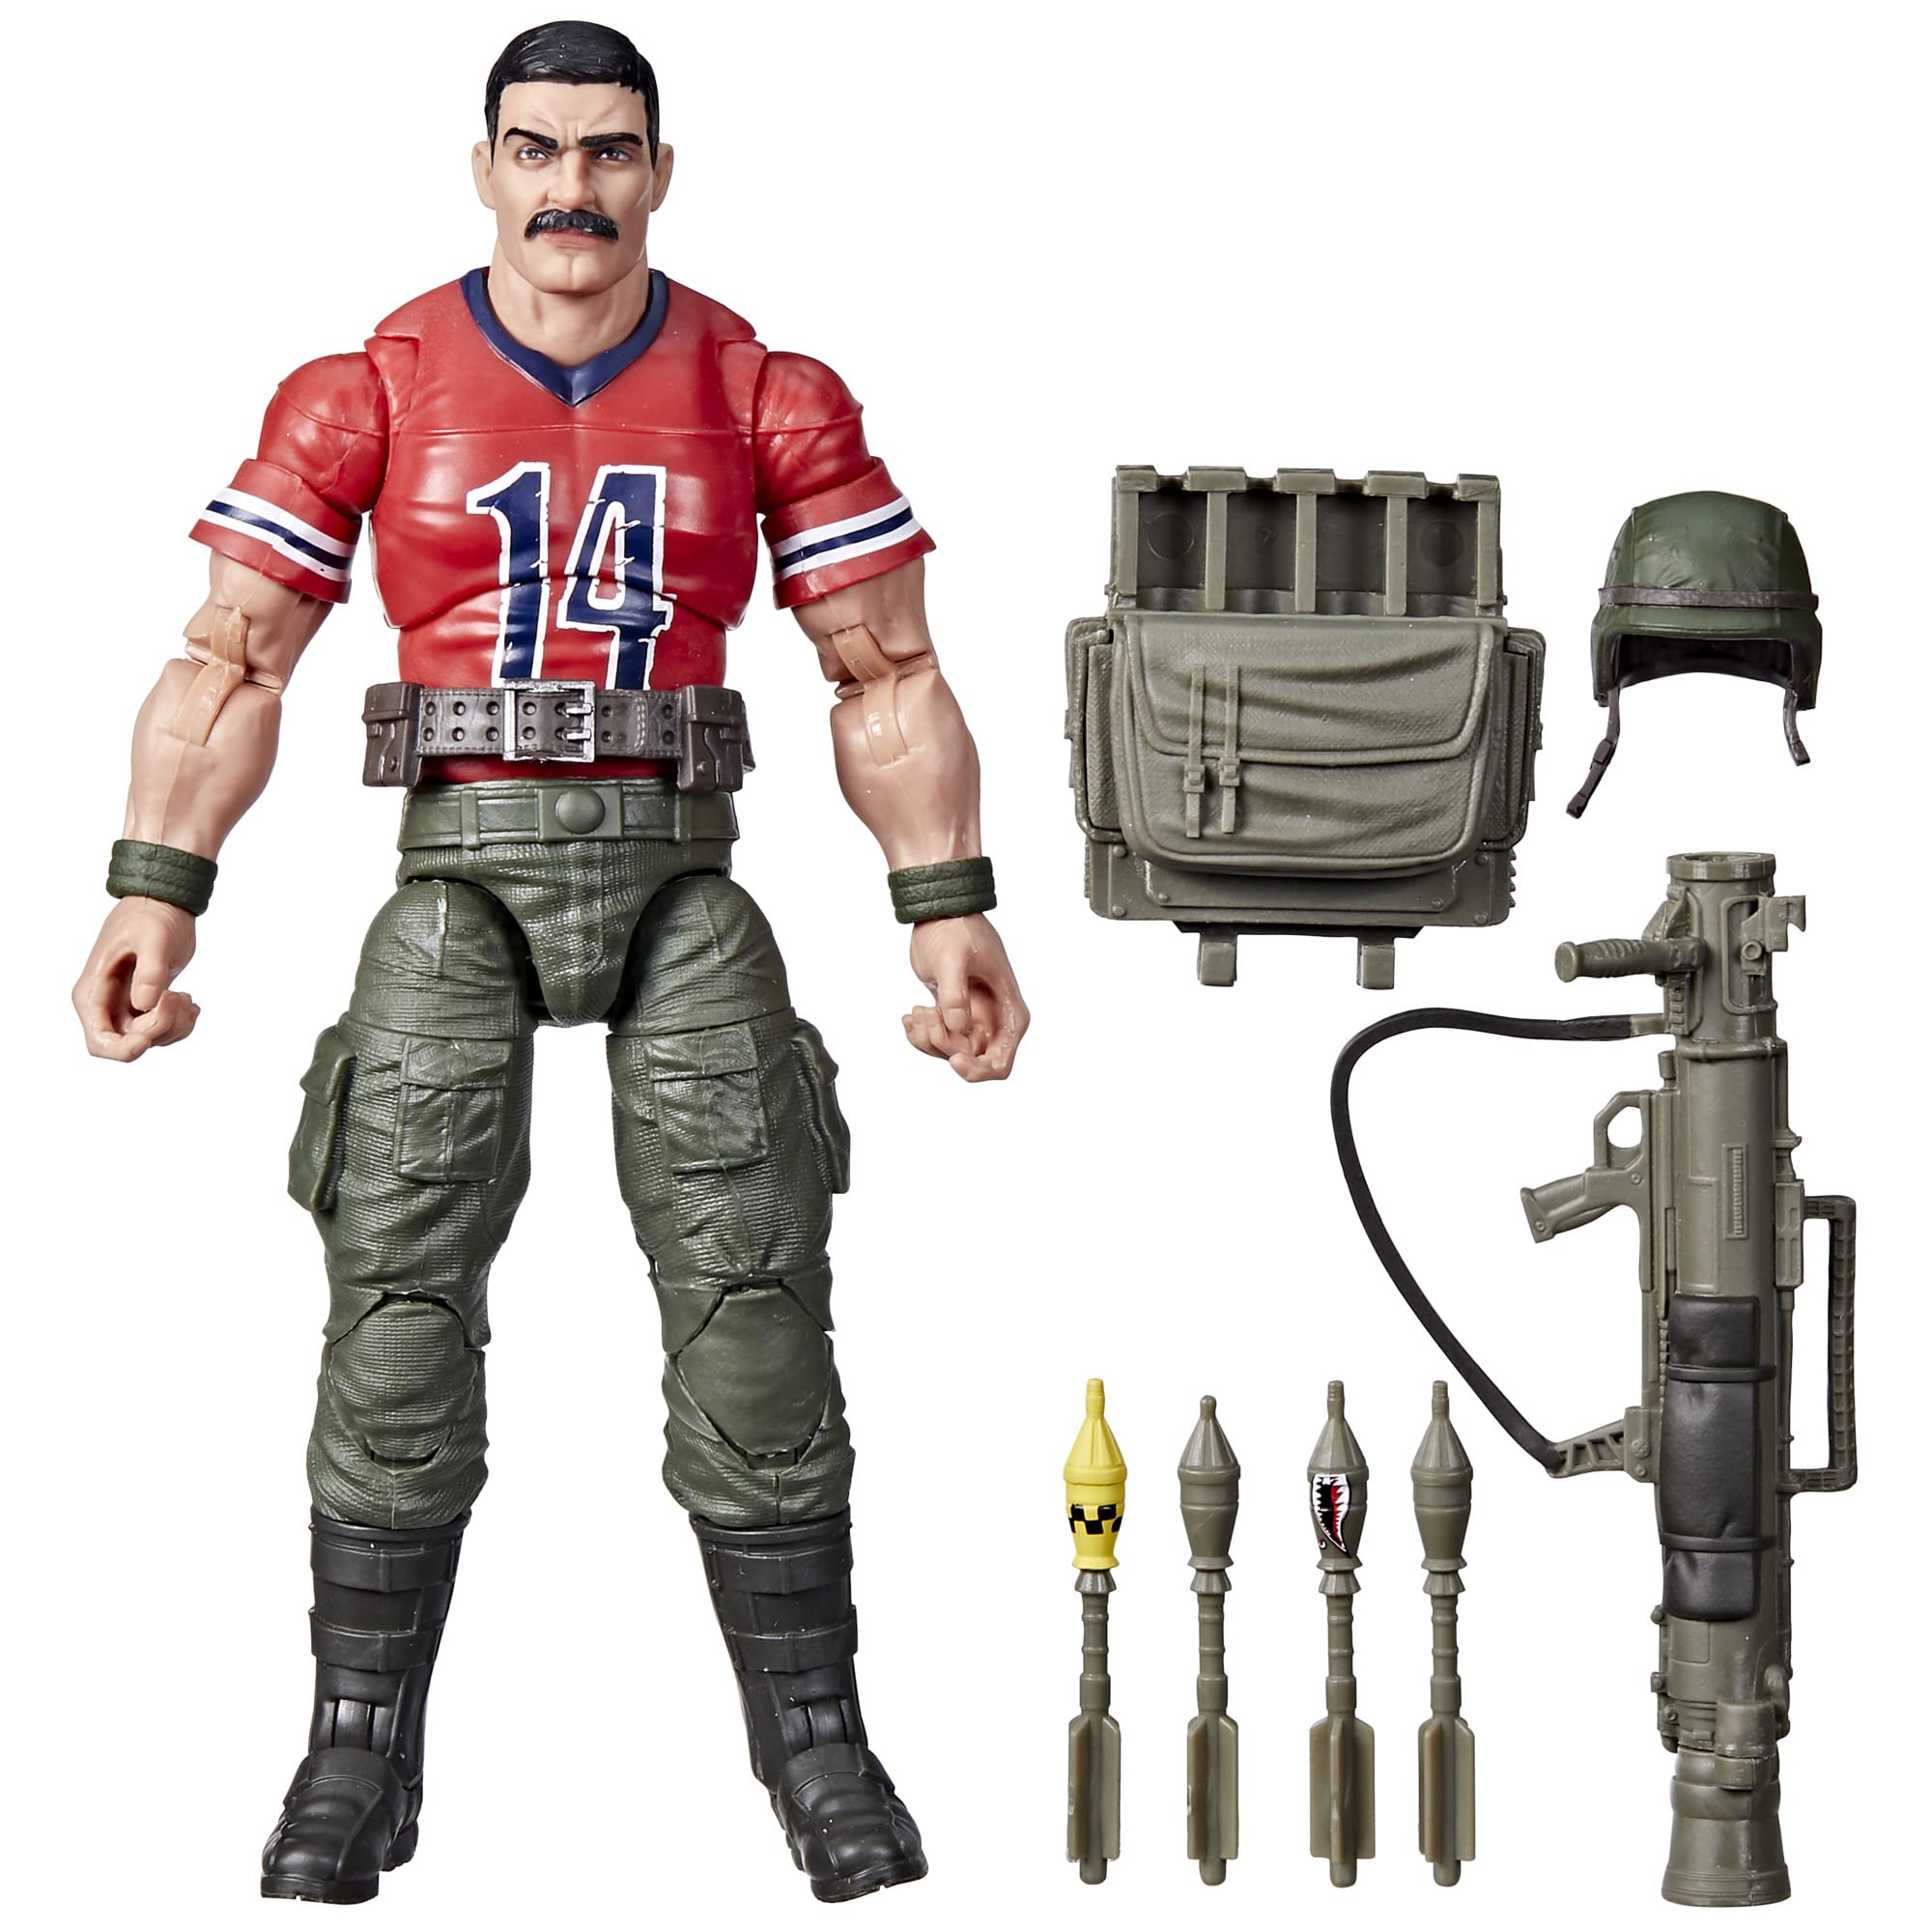 G.I. Joe Classified Series David L. Bazooka Katzenbogen Action Figure 62 Collectible Premium Toy with Accessories 6-Inch-Scale Custom Package Art